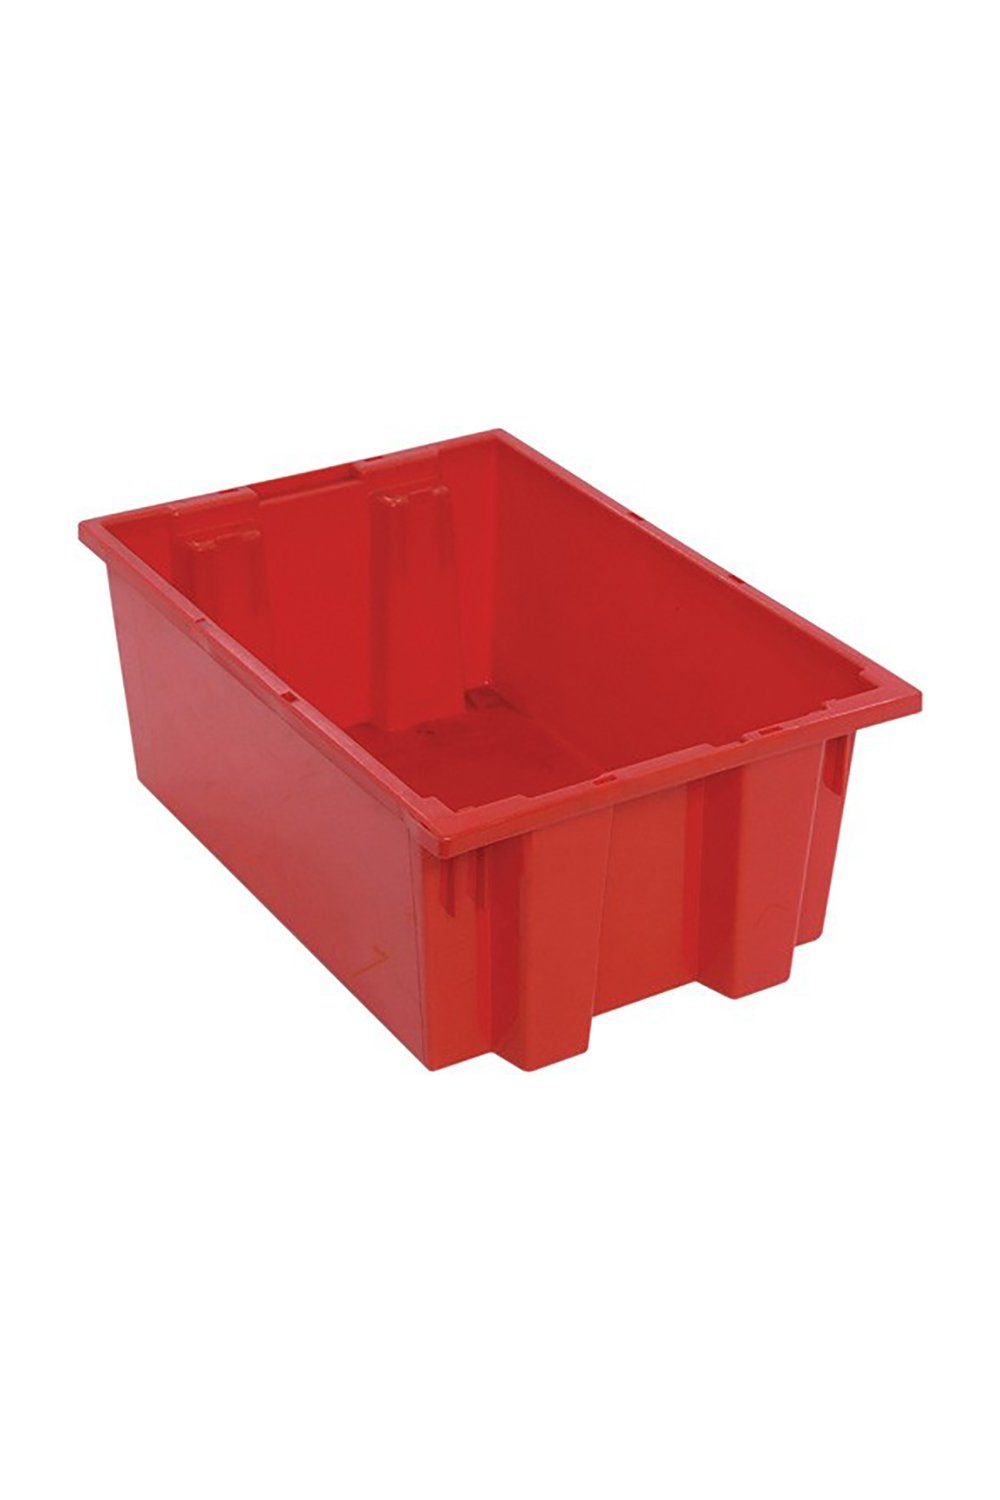 Stack and Nest Tote Bins & Containers Acart 19-1/2"L x 13-1/2"W x 8"H Red 